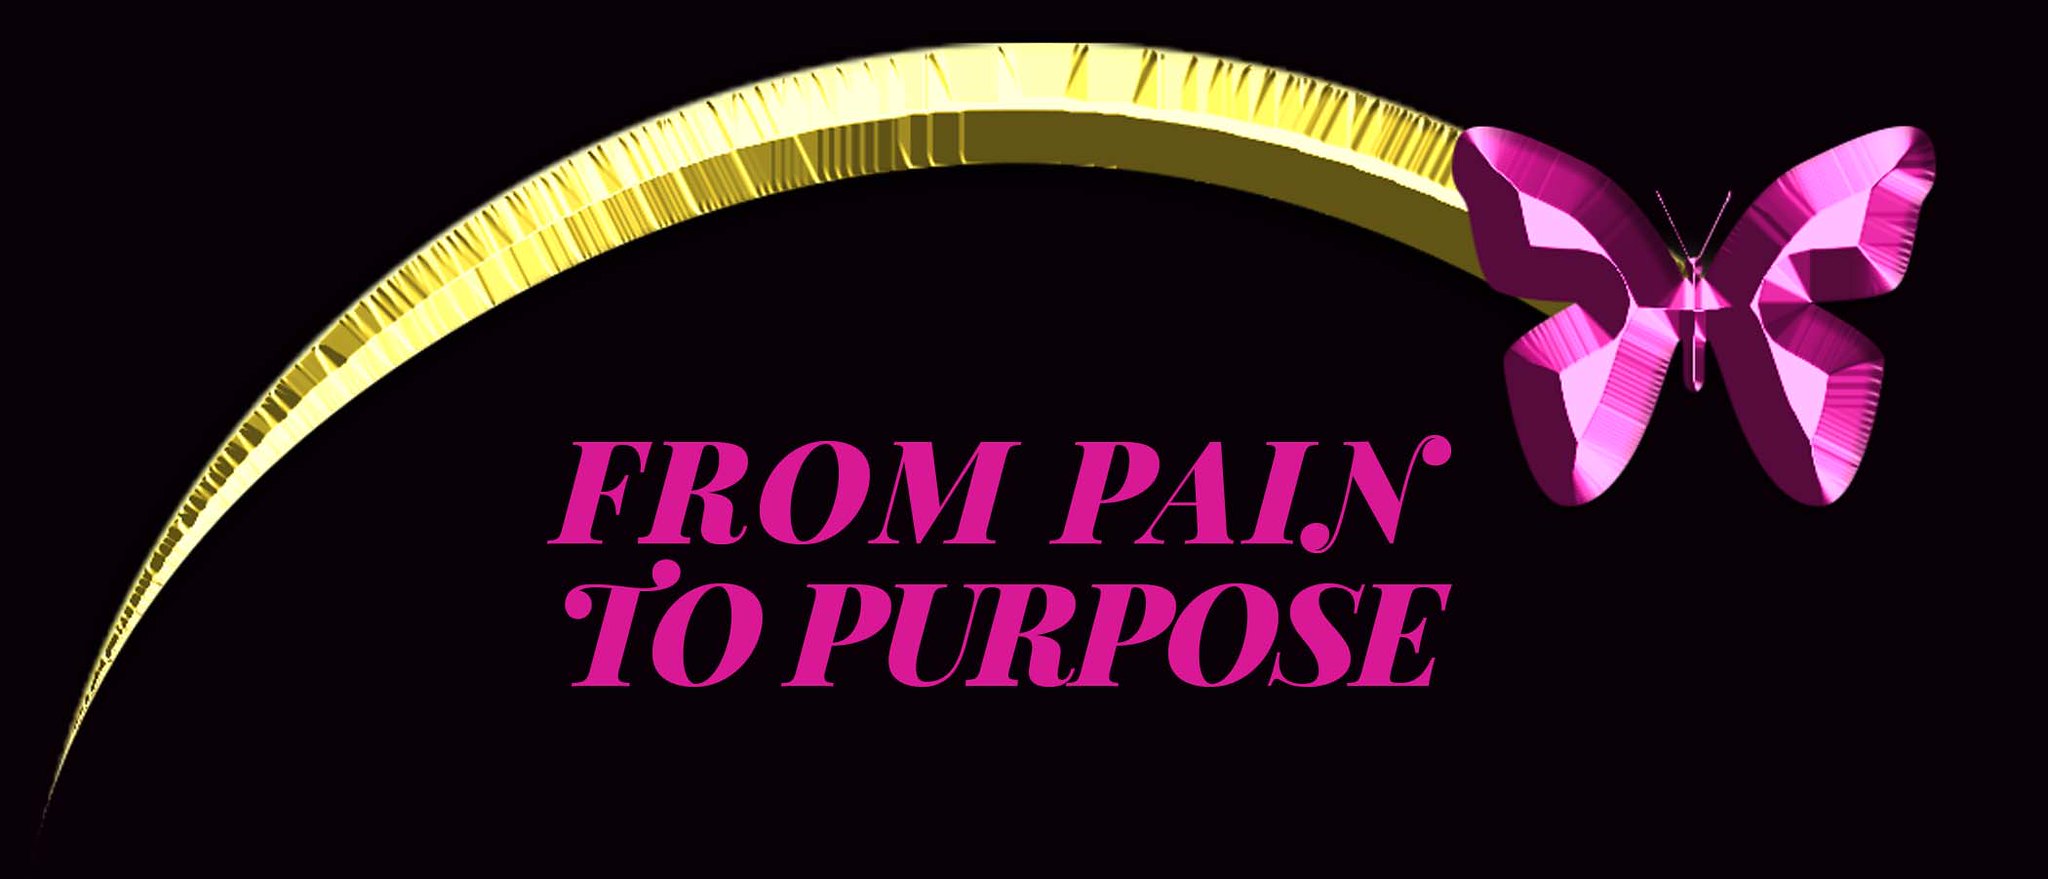 From Pain to Purpose - Hodges University Alumni Business Info